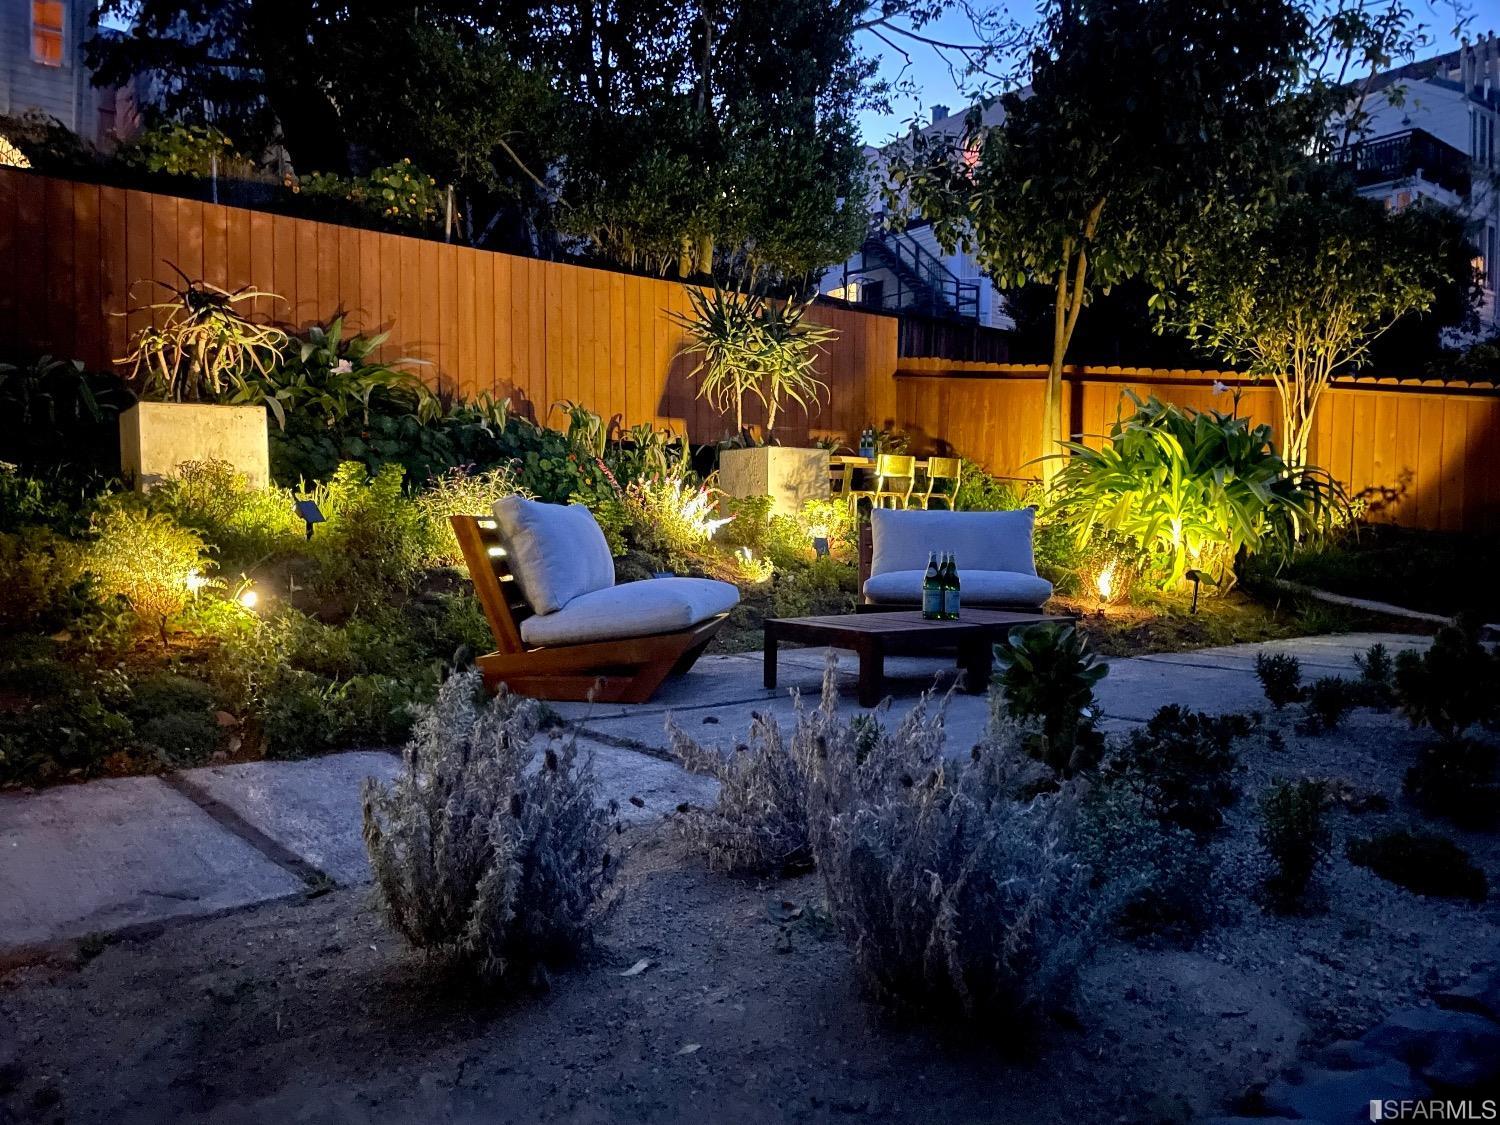 a view of a backyard with plants and a patio